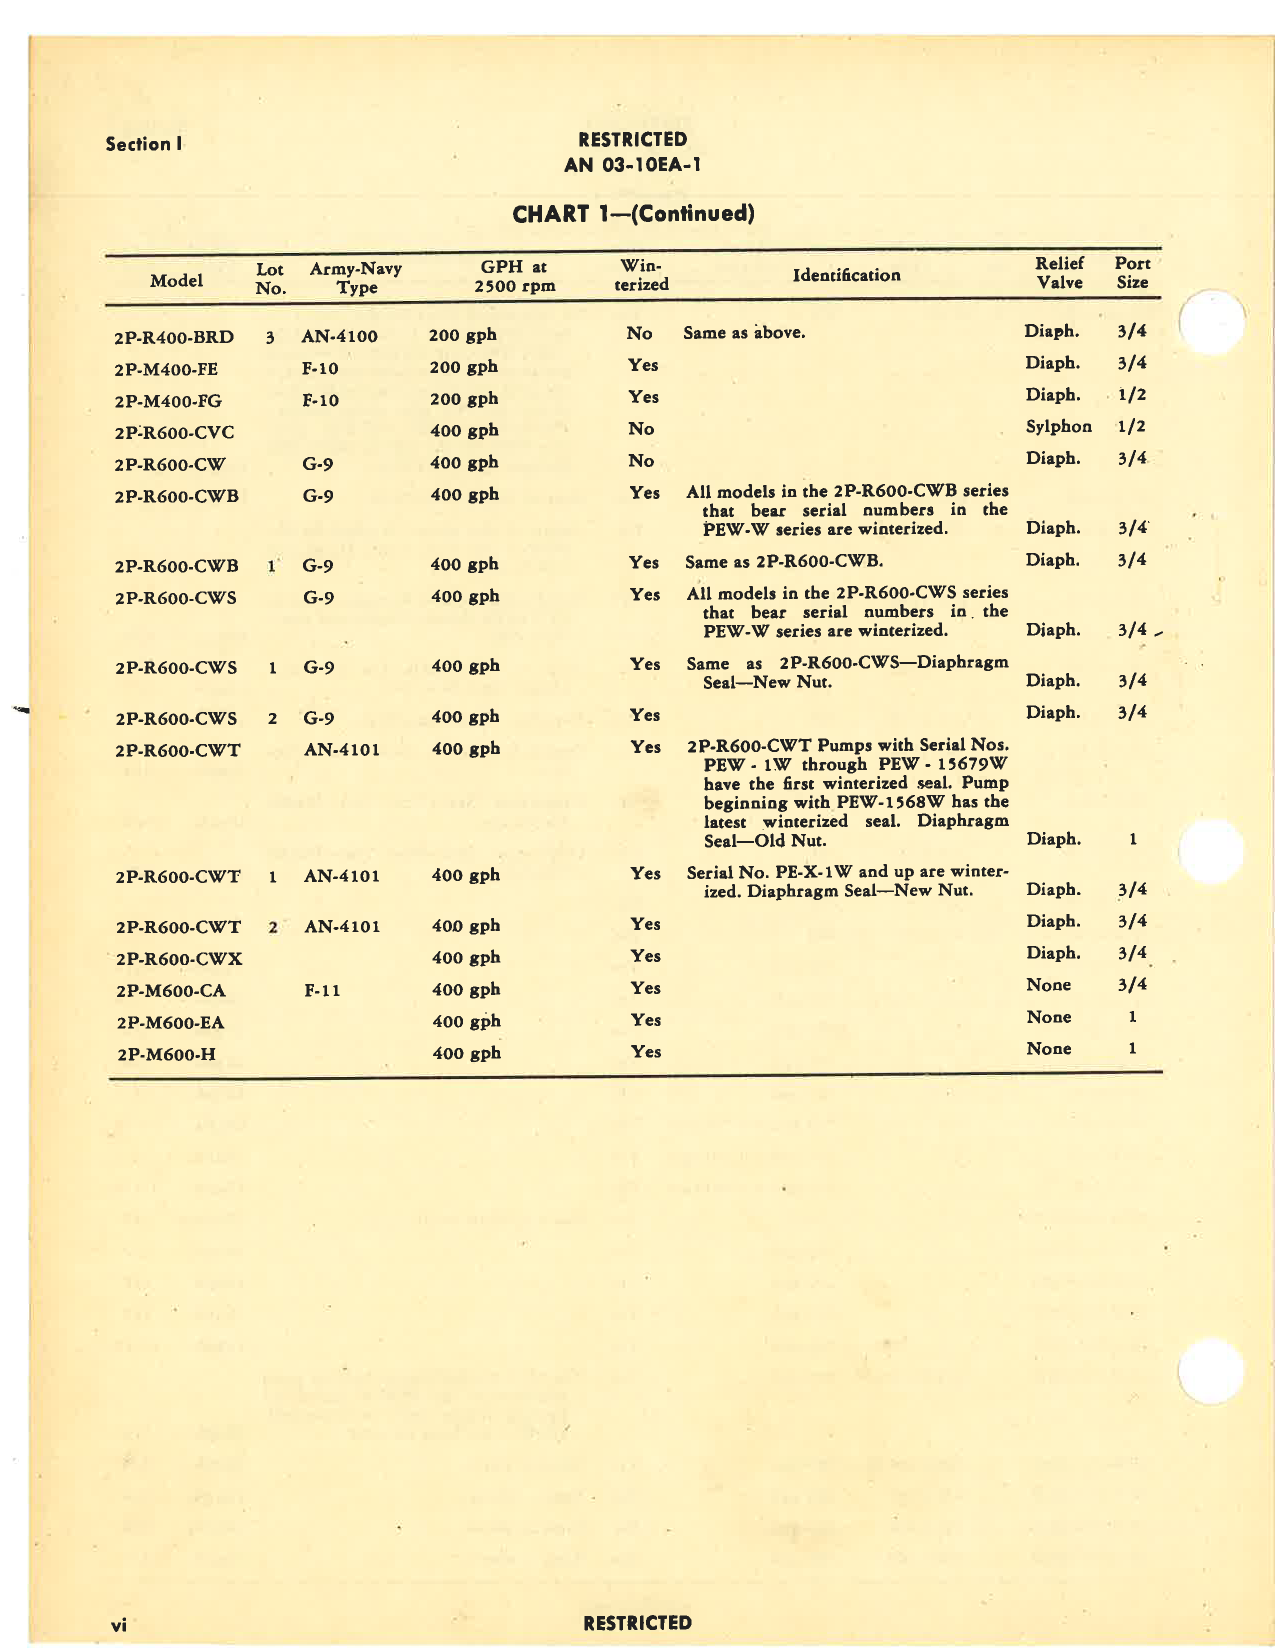 Sample page 8 from AirCorps Library document: Operation, Service, & Overhaul Instructions with Parts Catalog for Engine-Driven Fuel Pumps